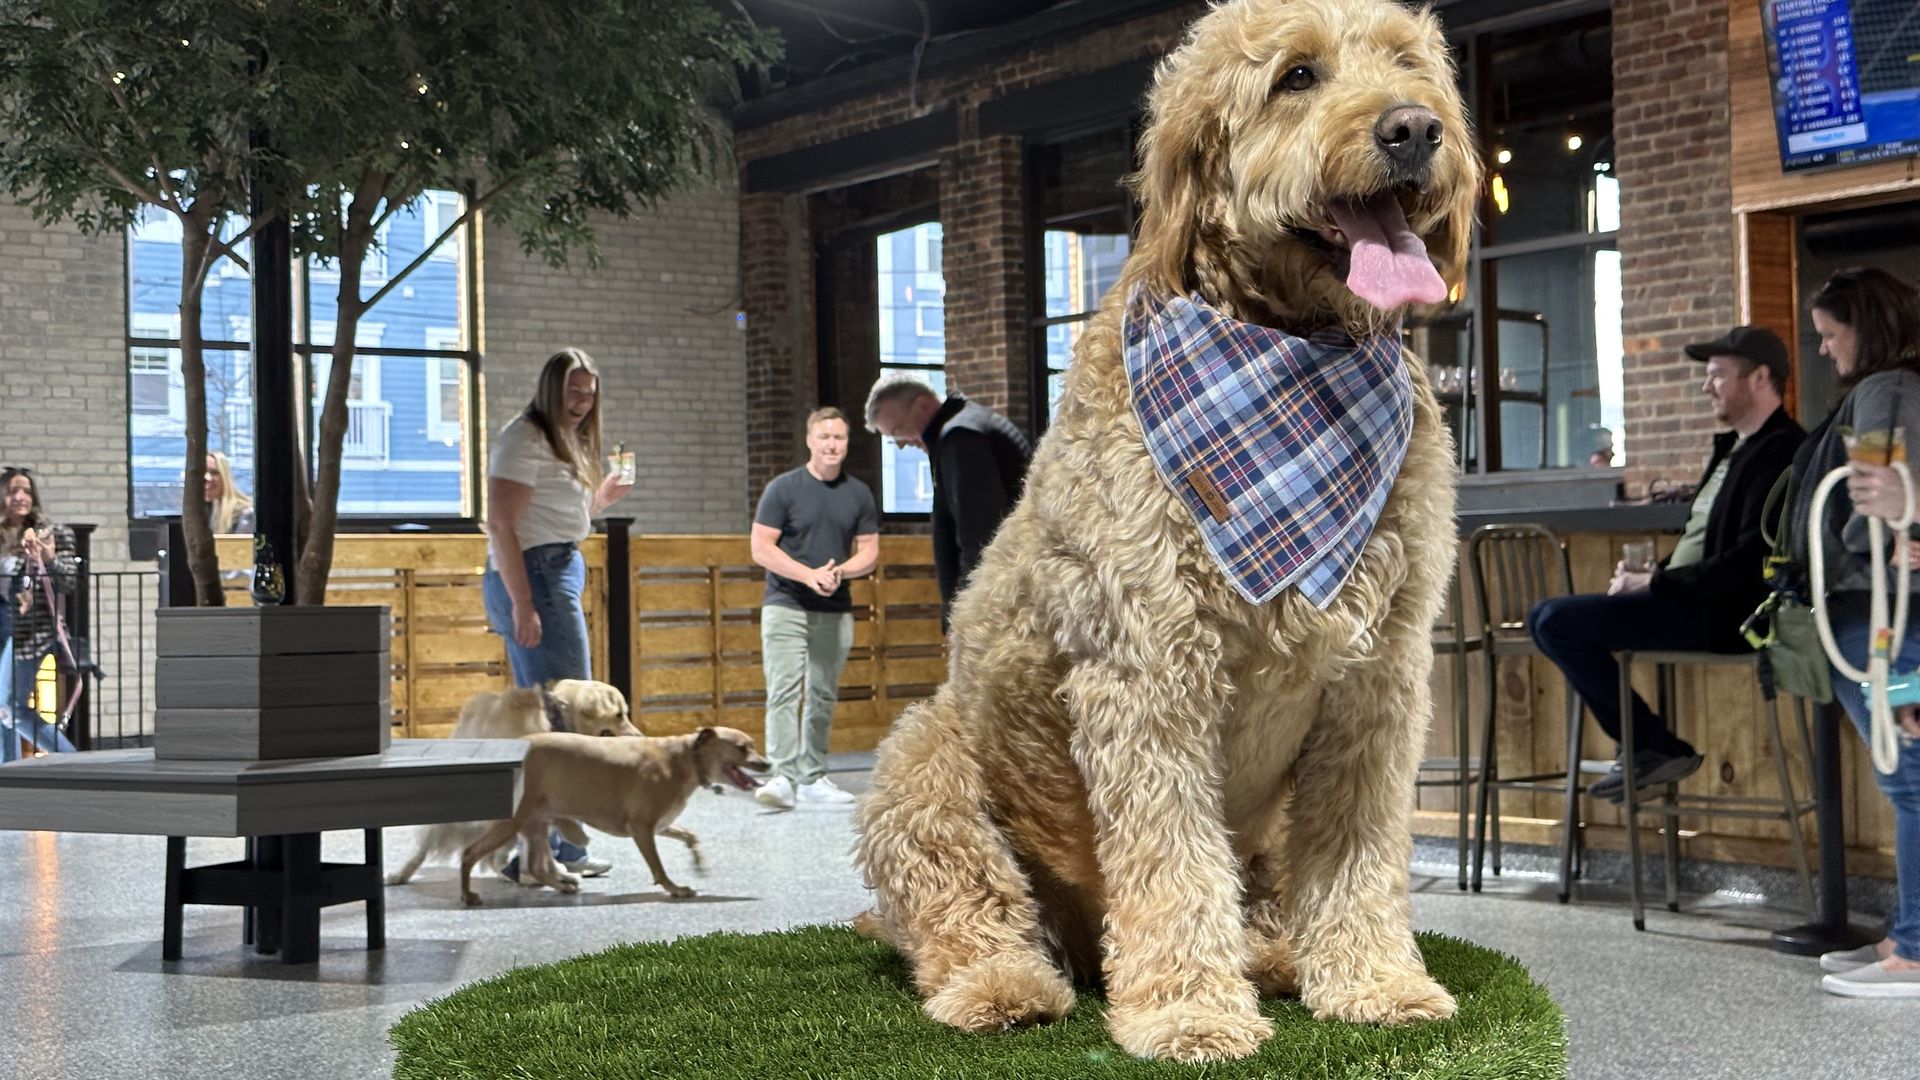 A young goolden doodle with a plaid blue bandana poses for a photo in Park-9 Dog Bar's off-leash area.